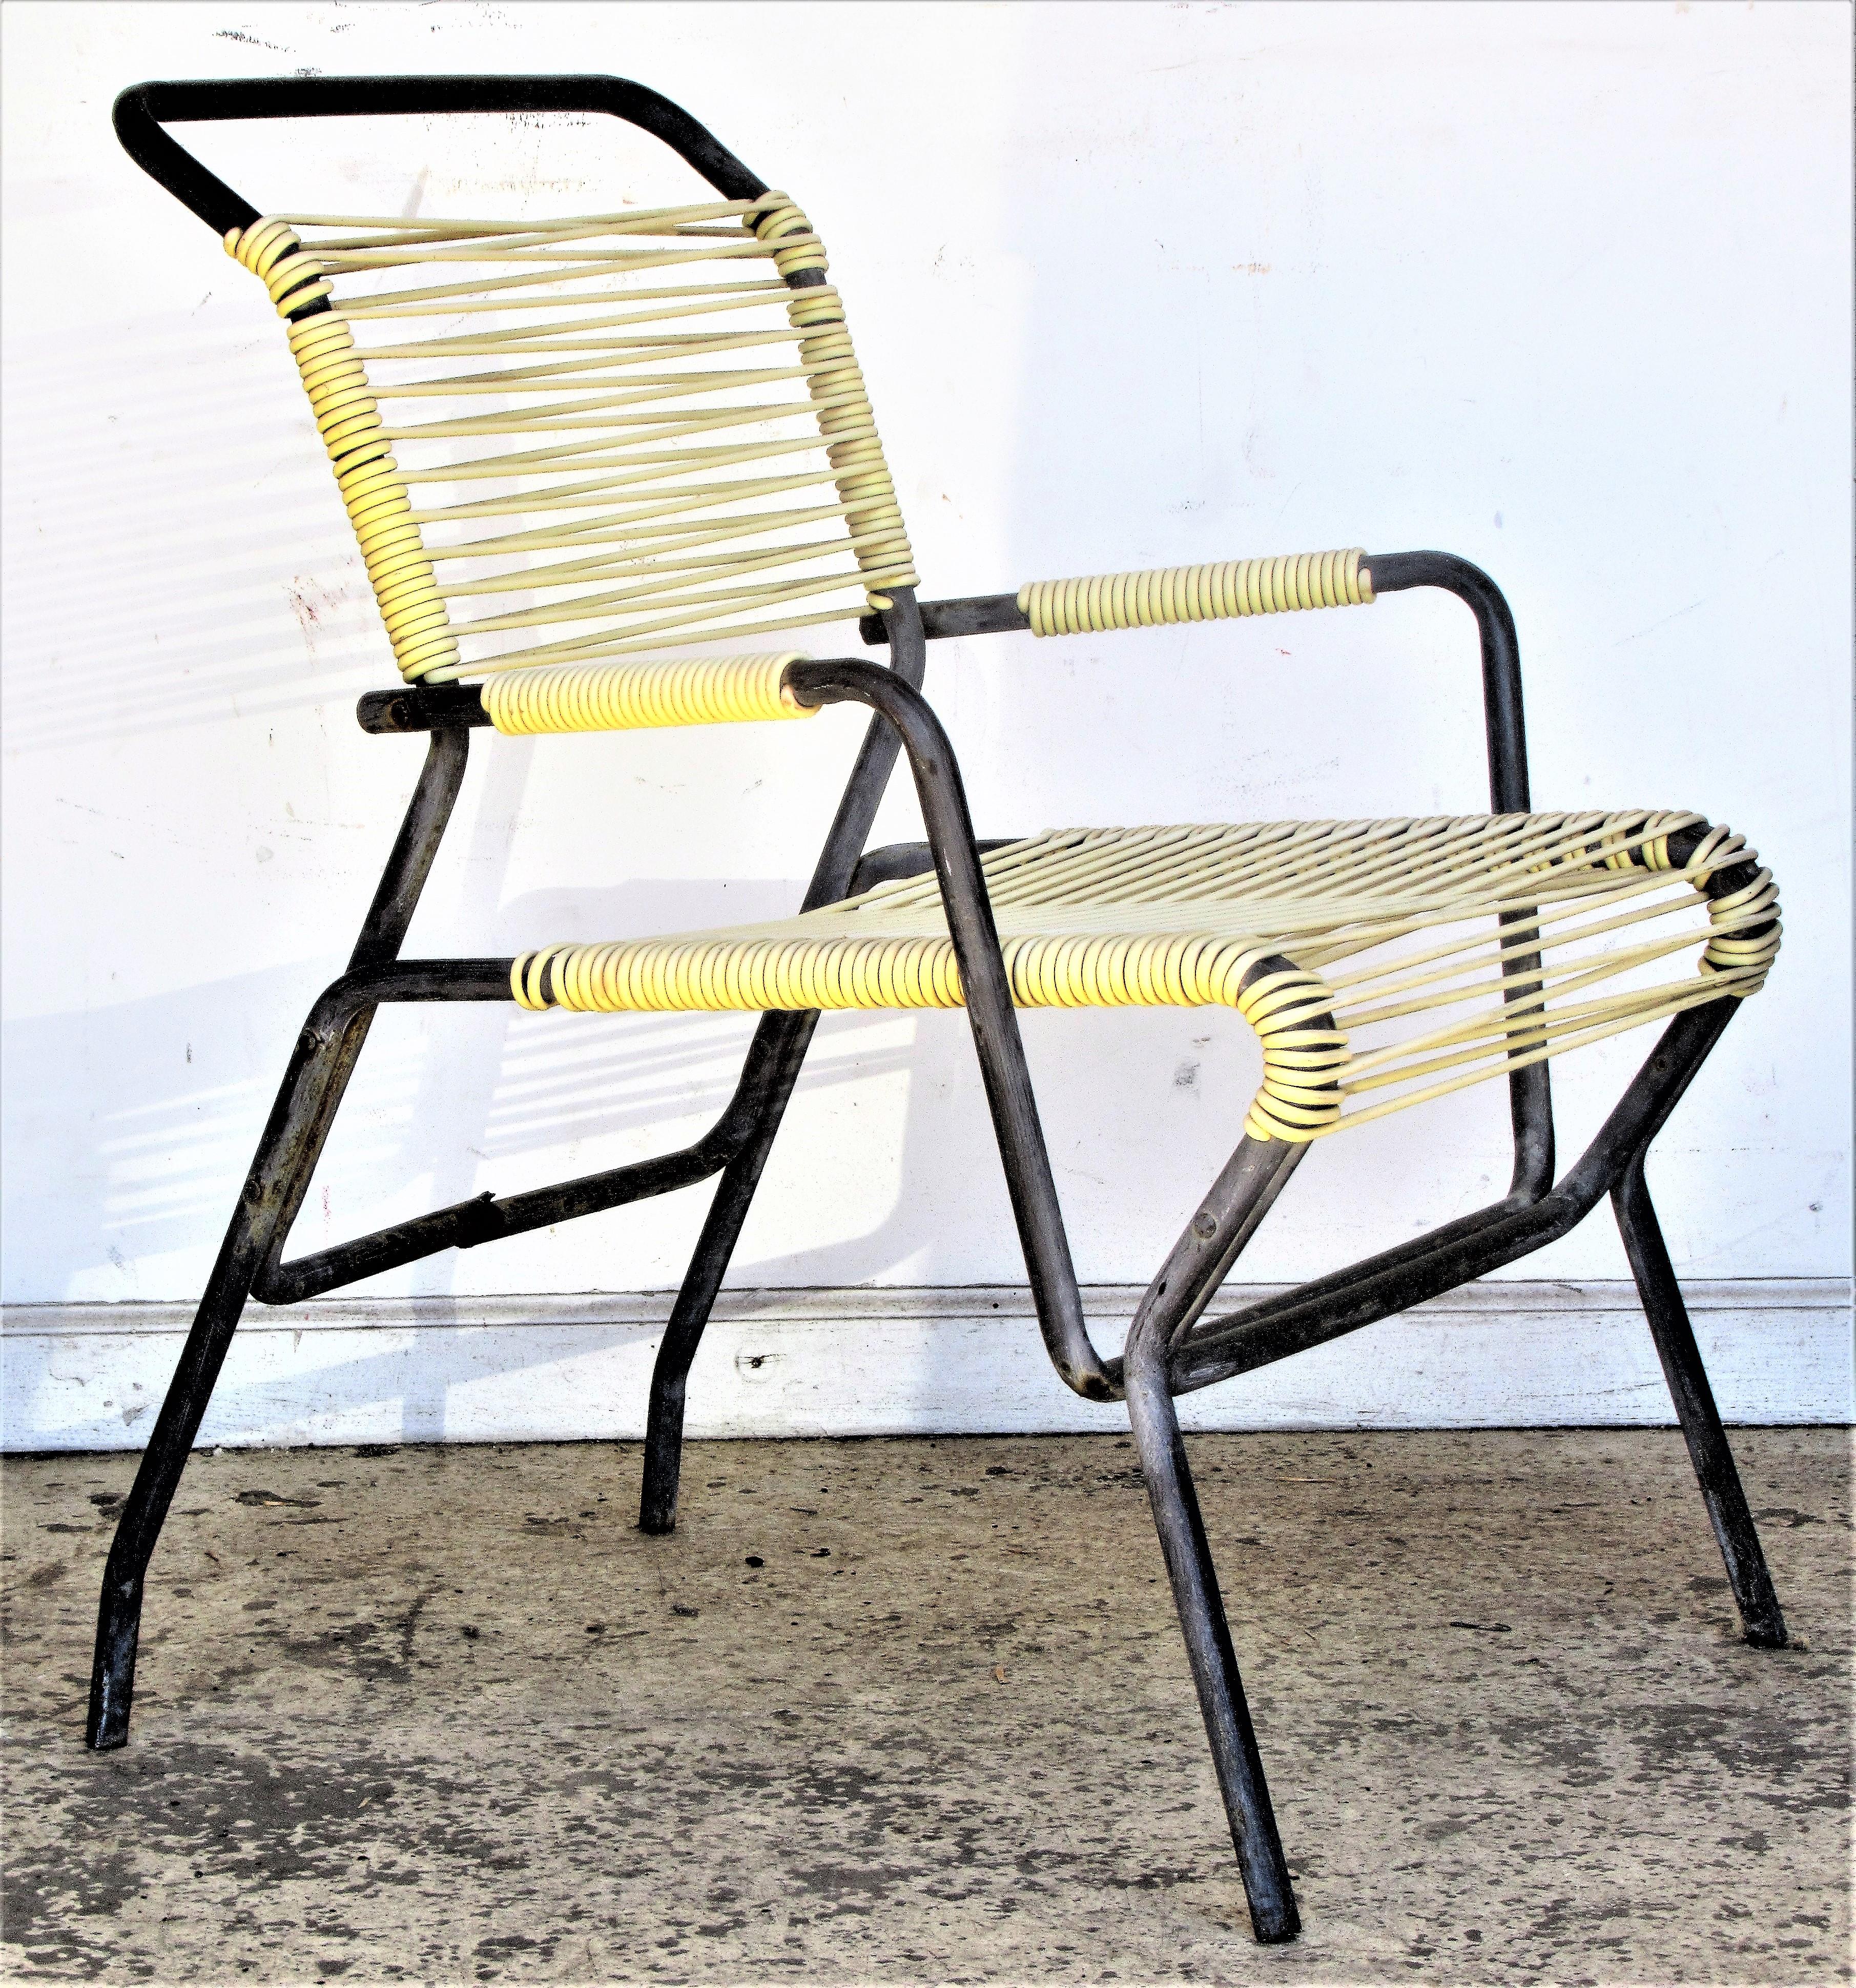 Modernist tubular iron and rubber nylon corded patio chairs by Surf Line with an exceptionally great looking sculptural form, Circa 1950's. In the style of Walter Lamb for Brown Jordan. Armchair in original blackened surface measures 30